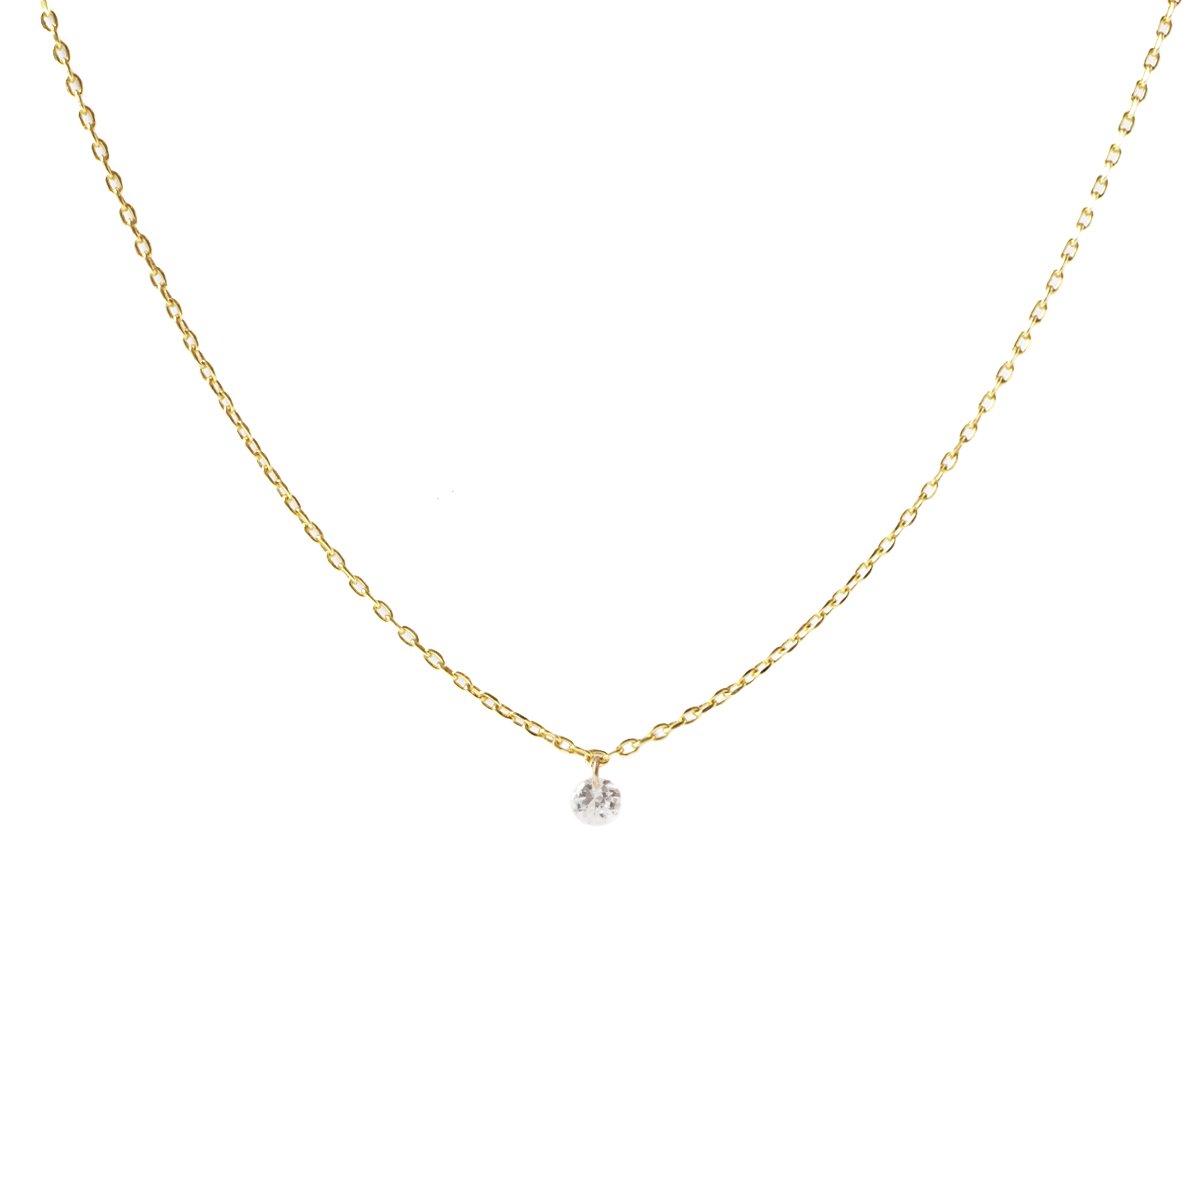 DAINTY RADIANT SOLITAIRE NECKLACE - CUBIC ZIRCONIA & GOLD - SO PRETTY CARA COTTER